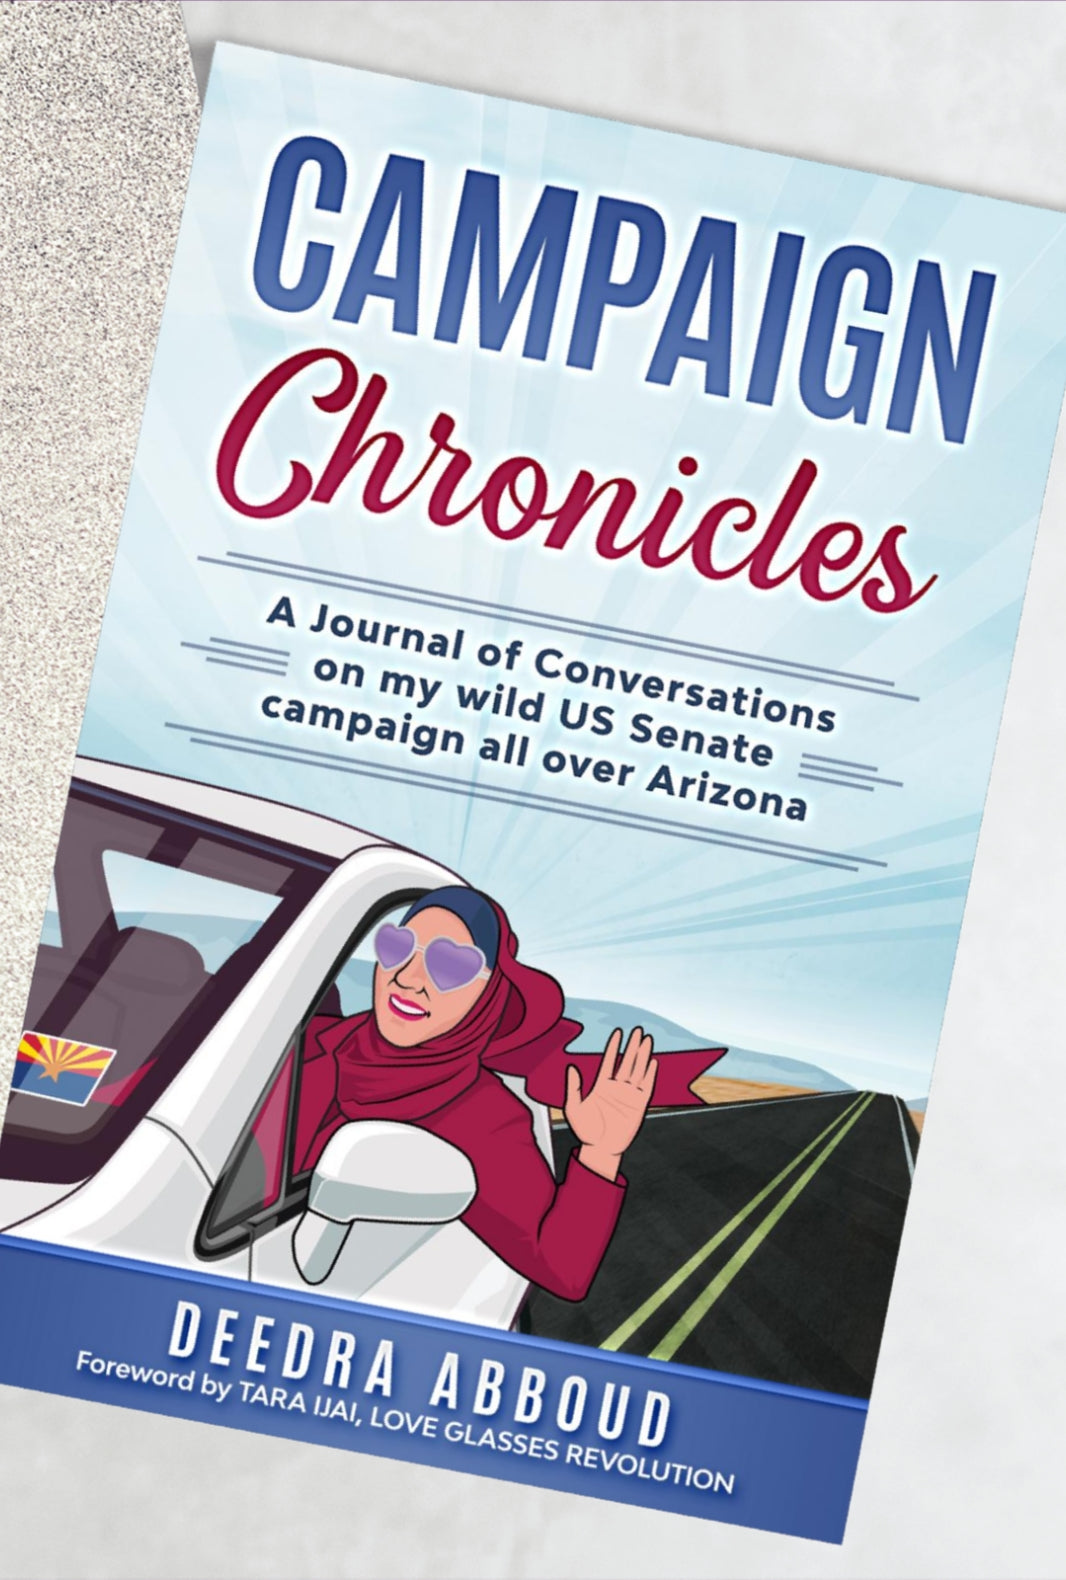 Campaign Chronicles by Deedra Abboud SIGNED COPY - Love Glasses Revolution